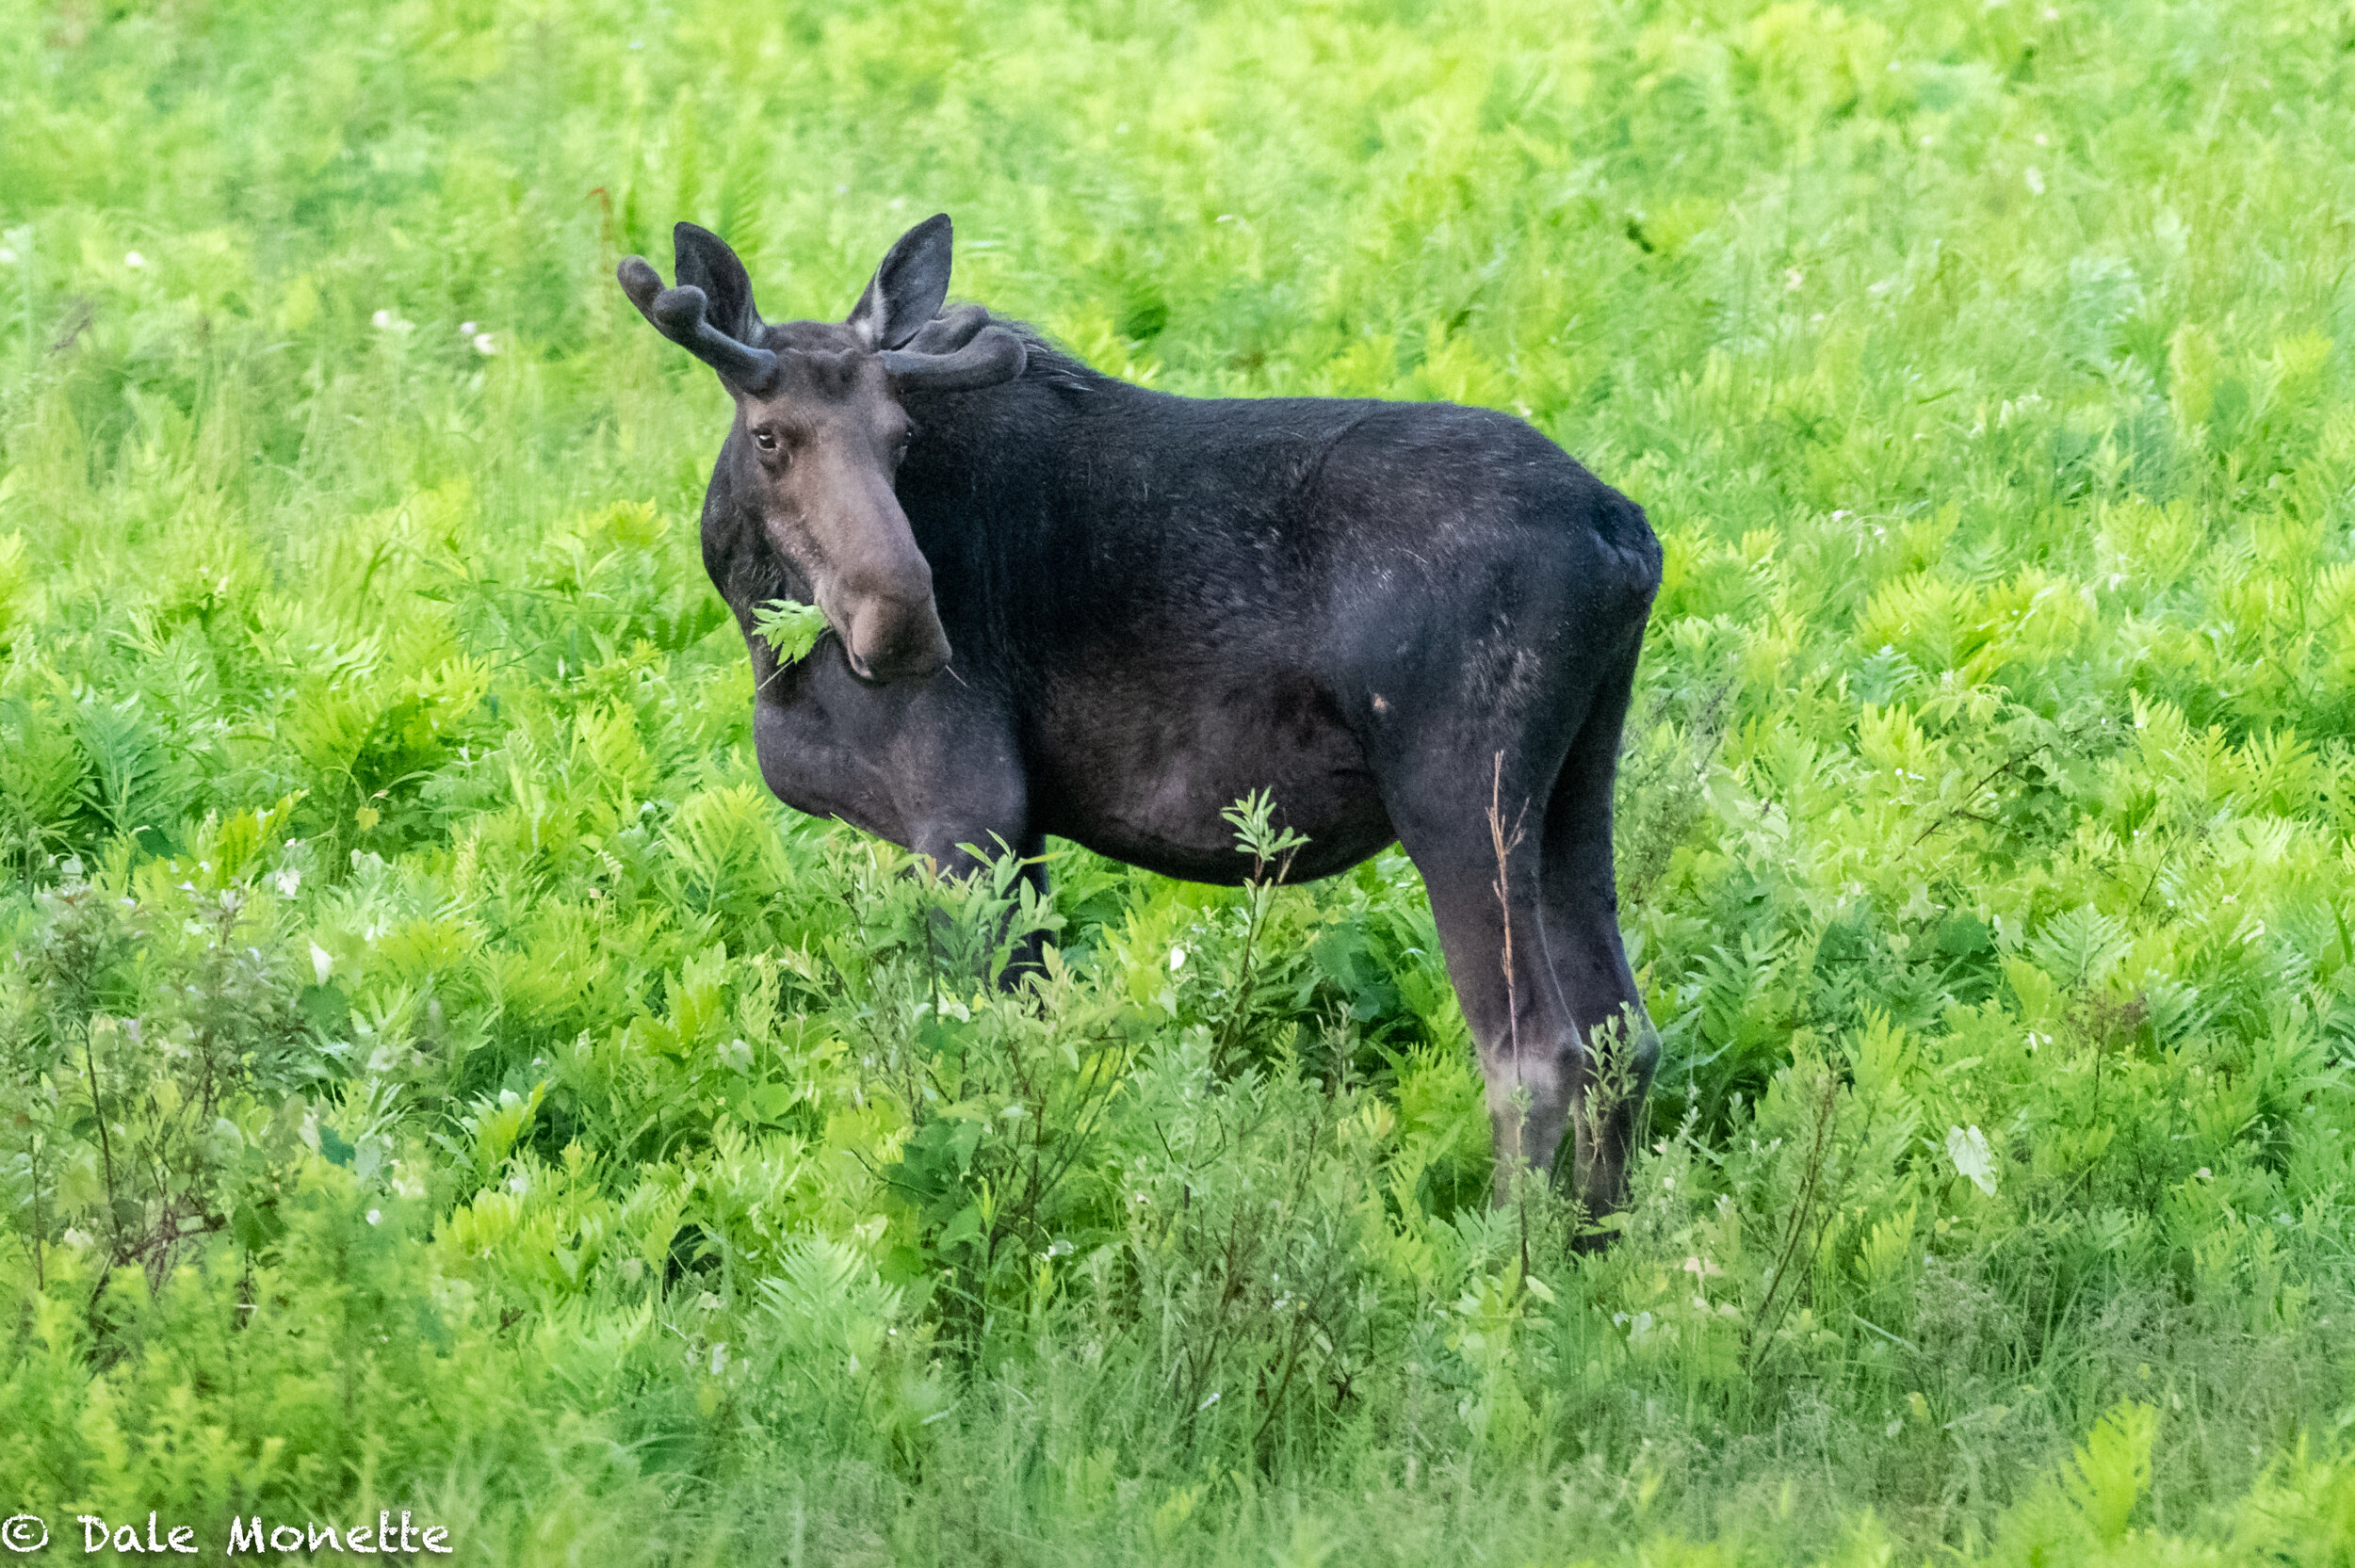   I love this time of year as the moose are hitting the swamps to get the nourishment water plants supply them. A full grown moose needs 50 pounds a day of plants and bark to sustain their health.  